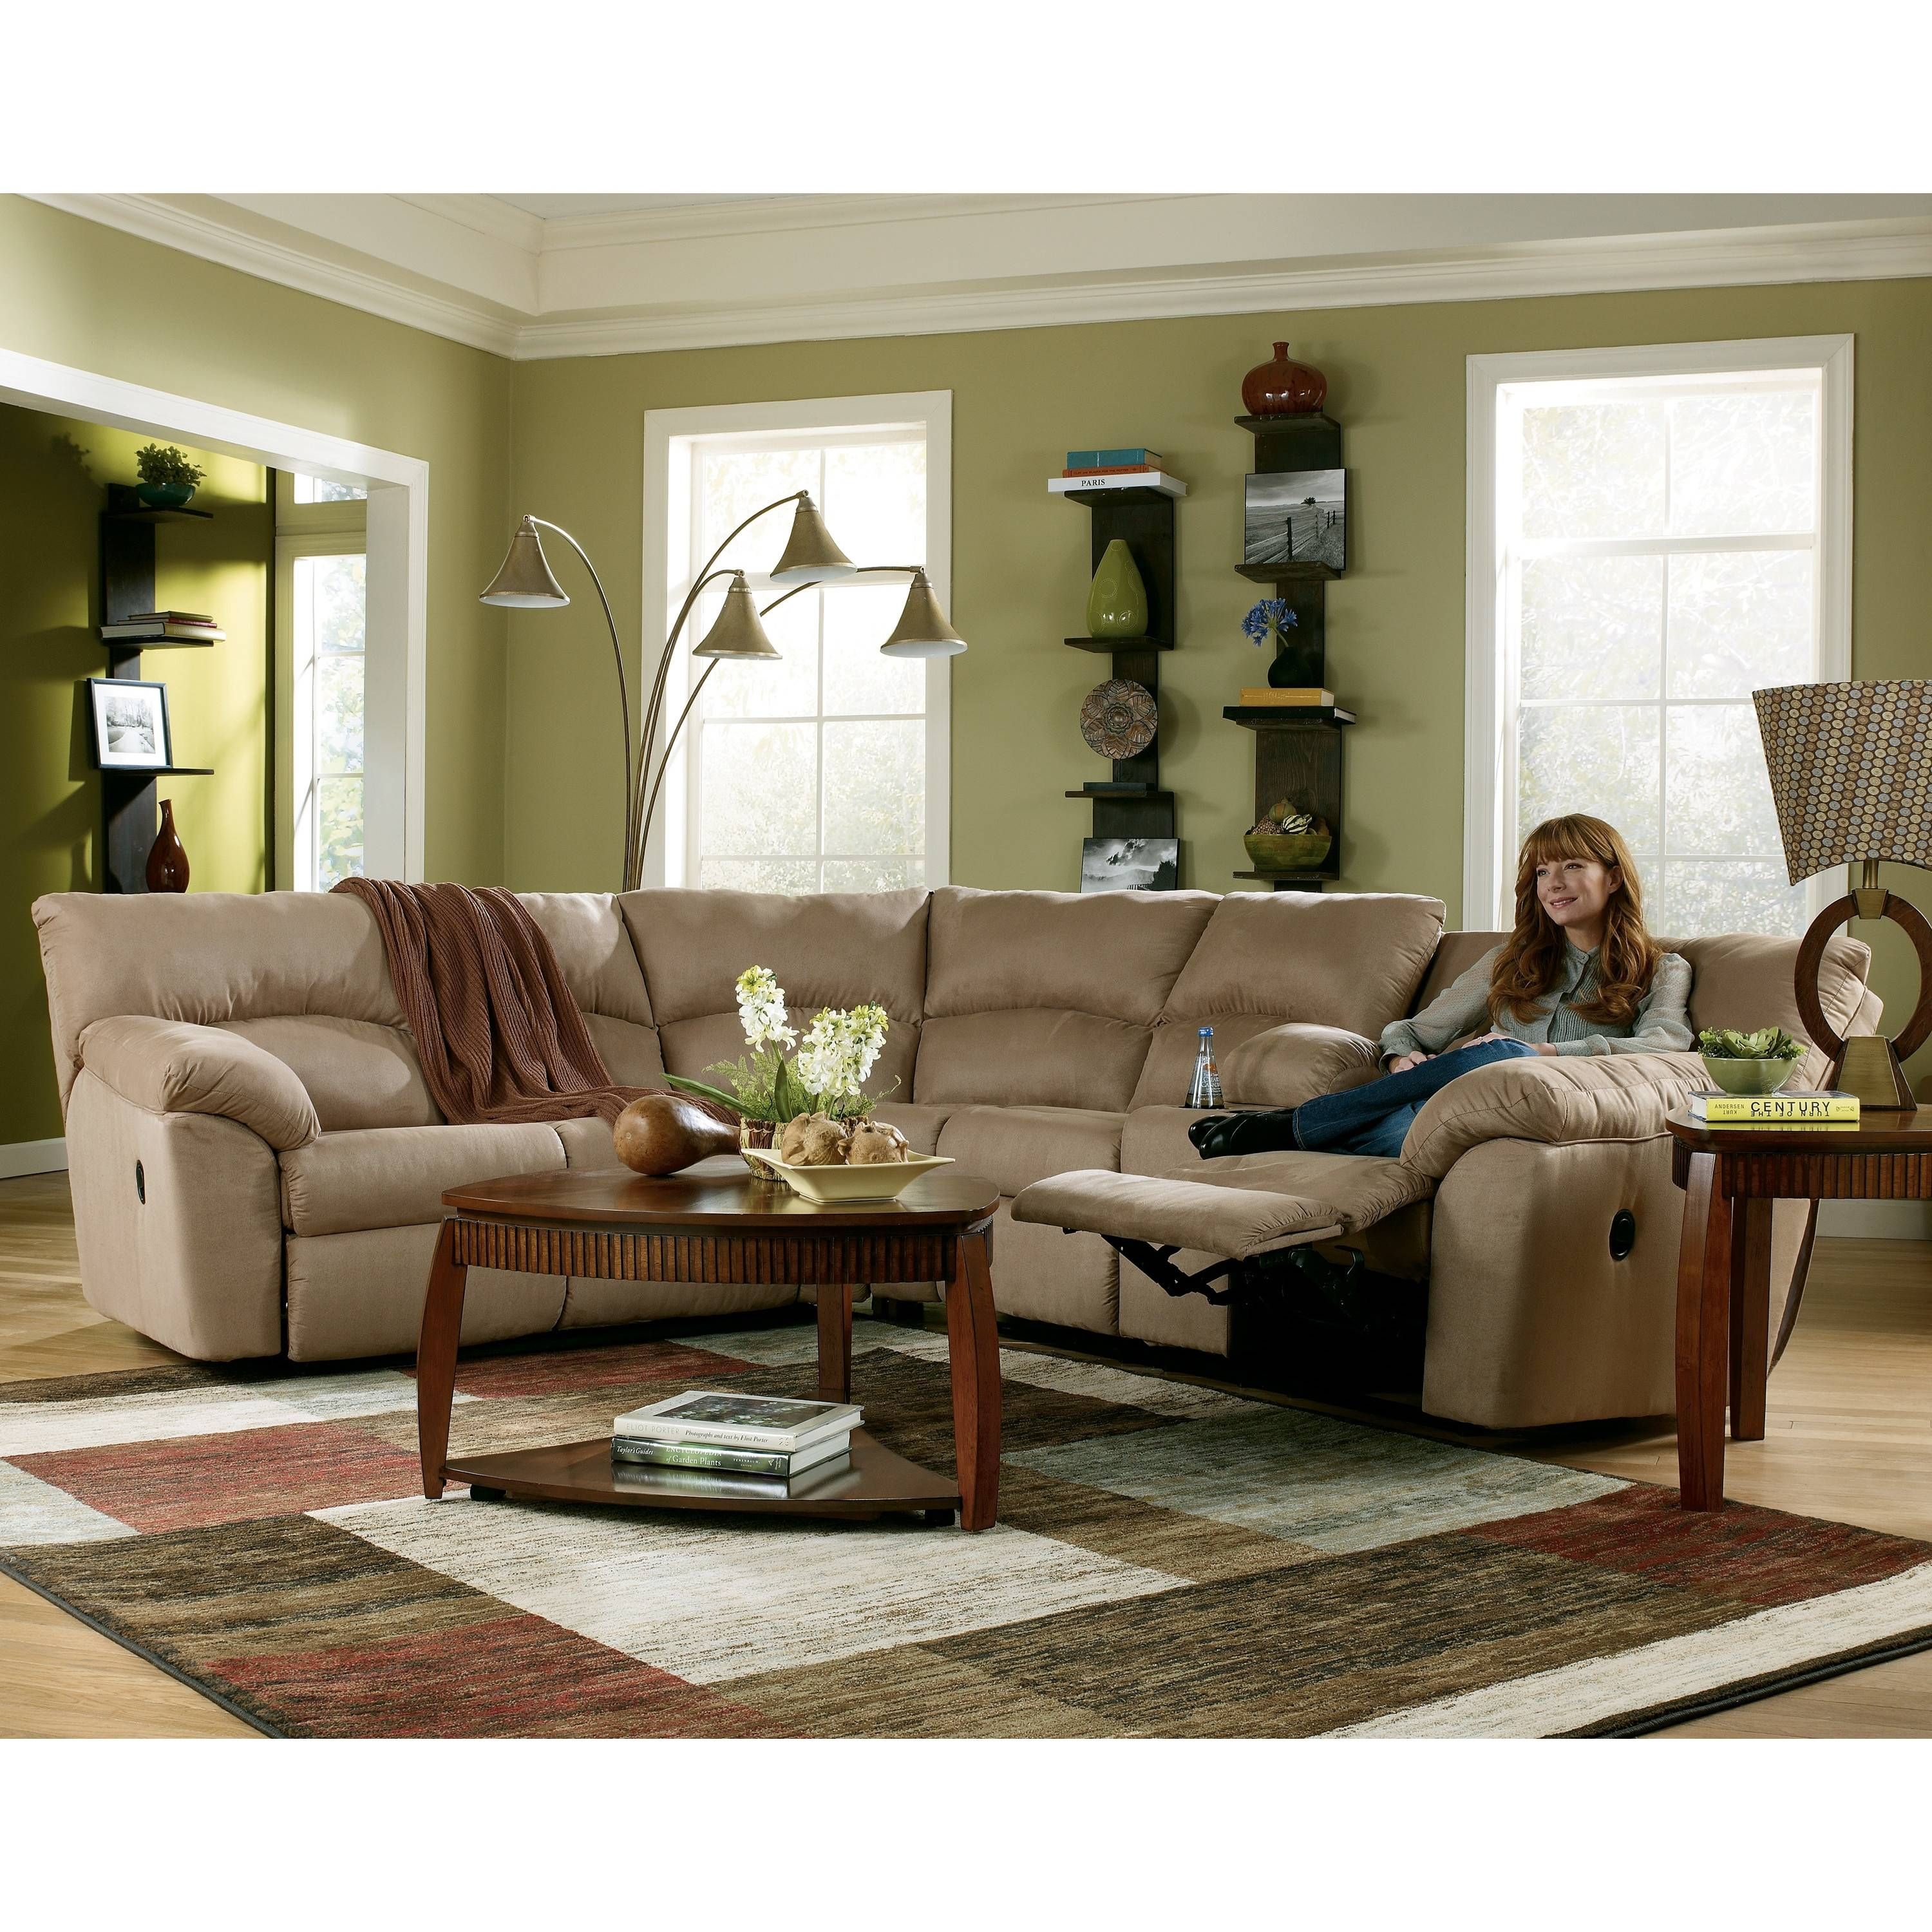 Furniture L Shaped Grey Sectional Sofa With Round Coffee Table Inside Coffee Table For Sectional Sofa 